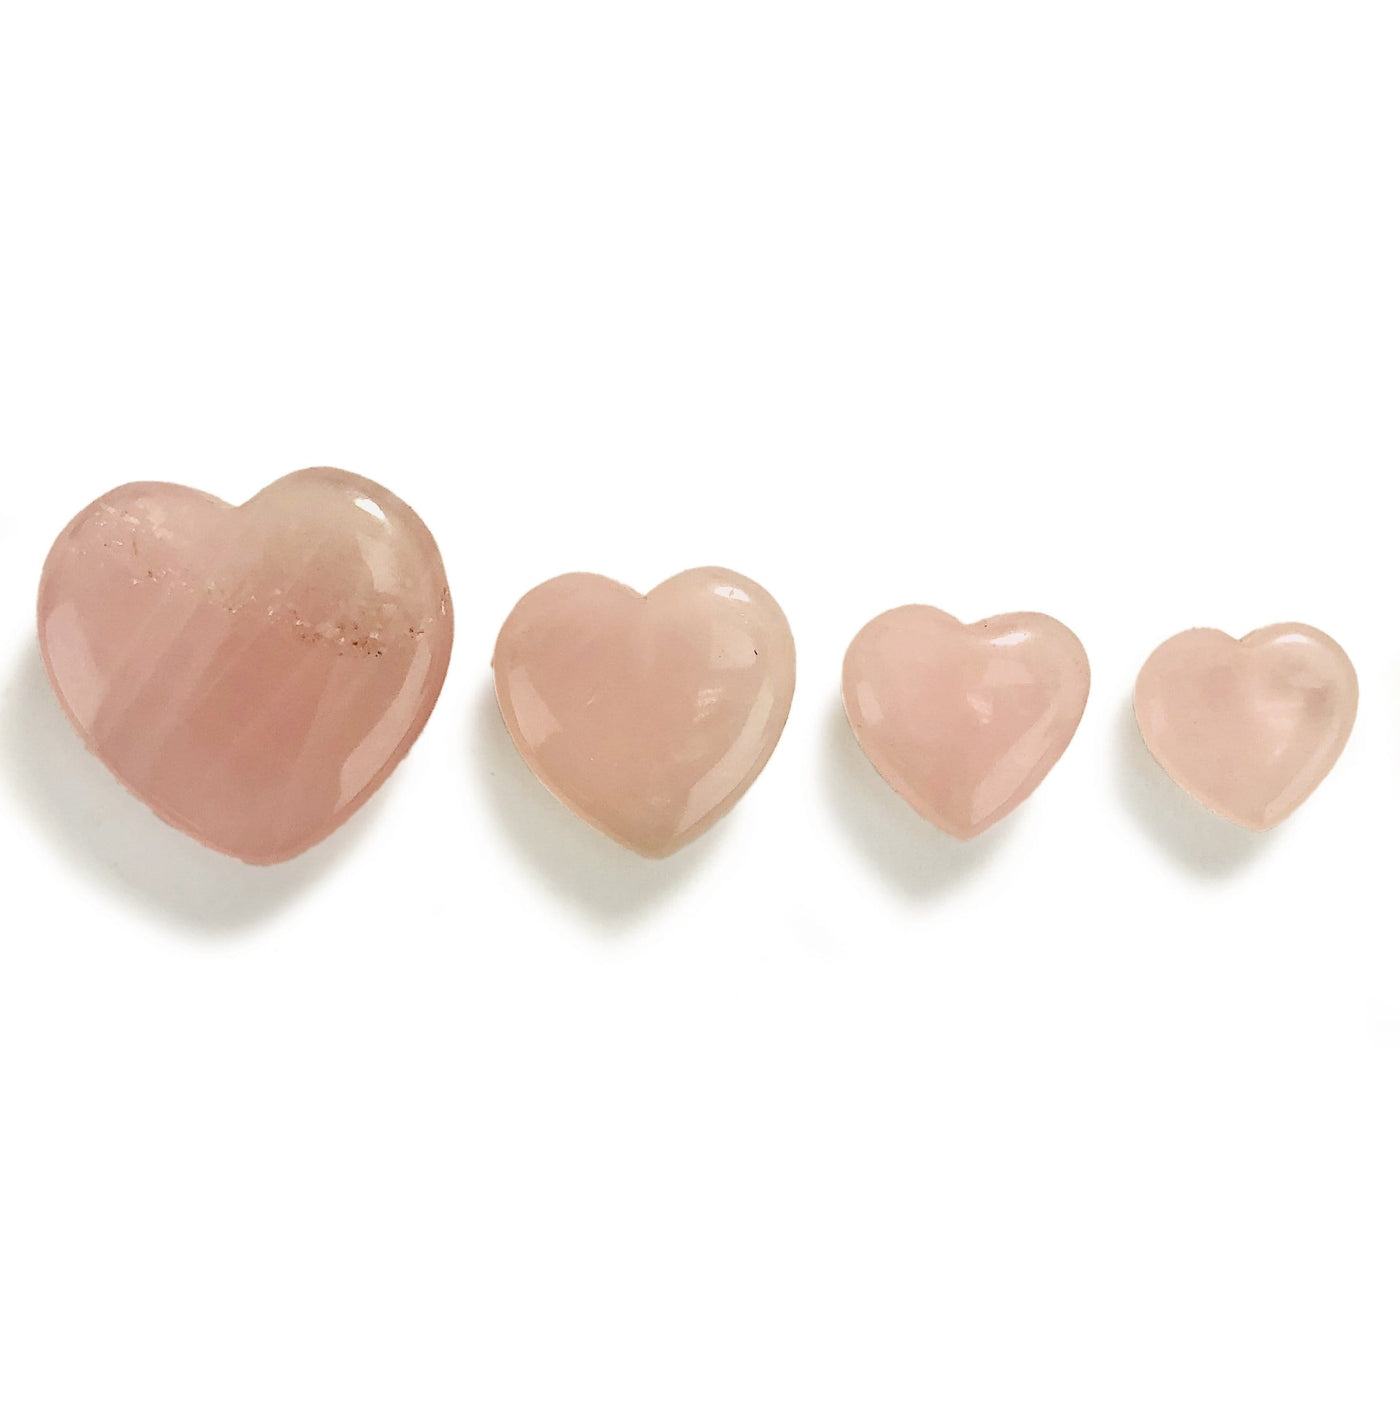 4 Rose Quartz Hearts of different sizes lined up on white background